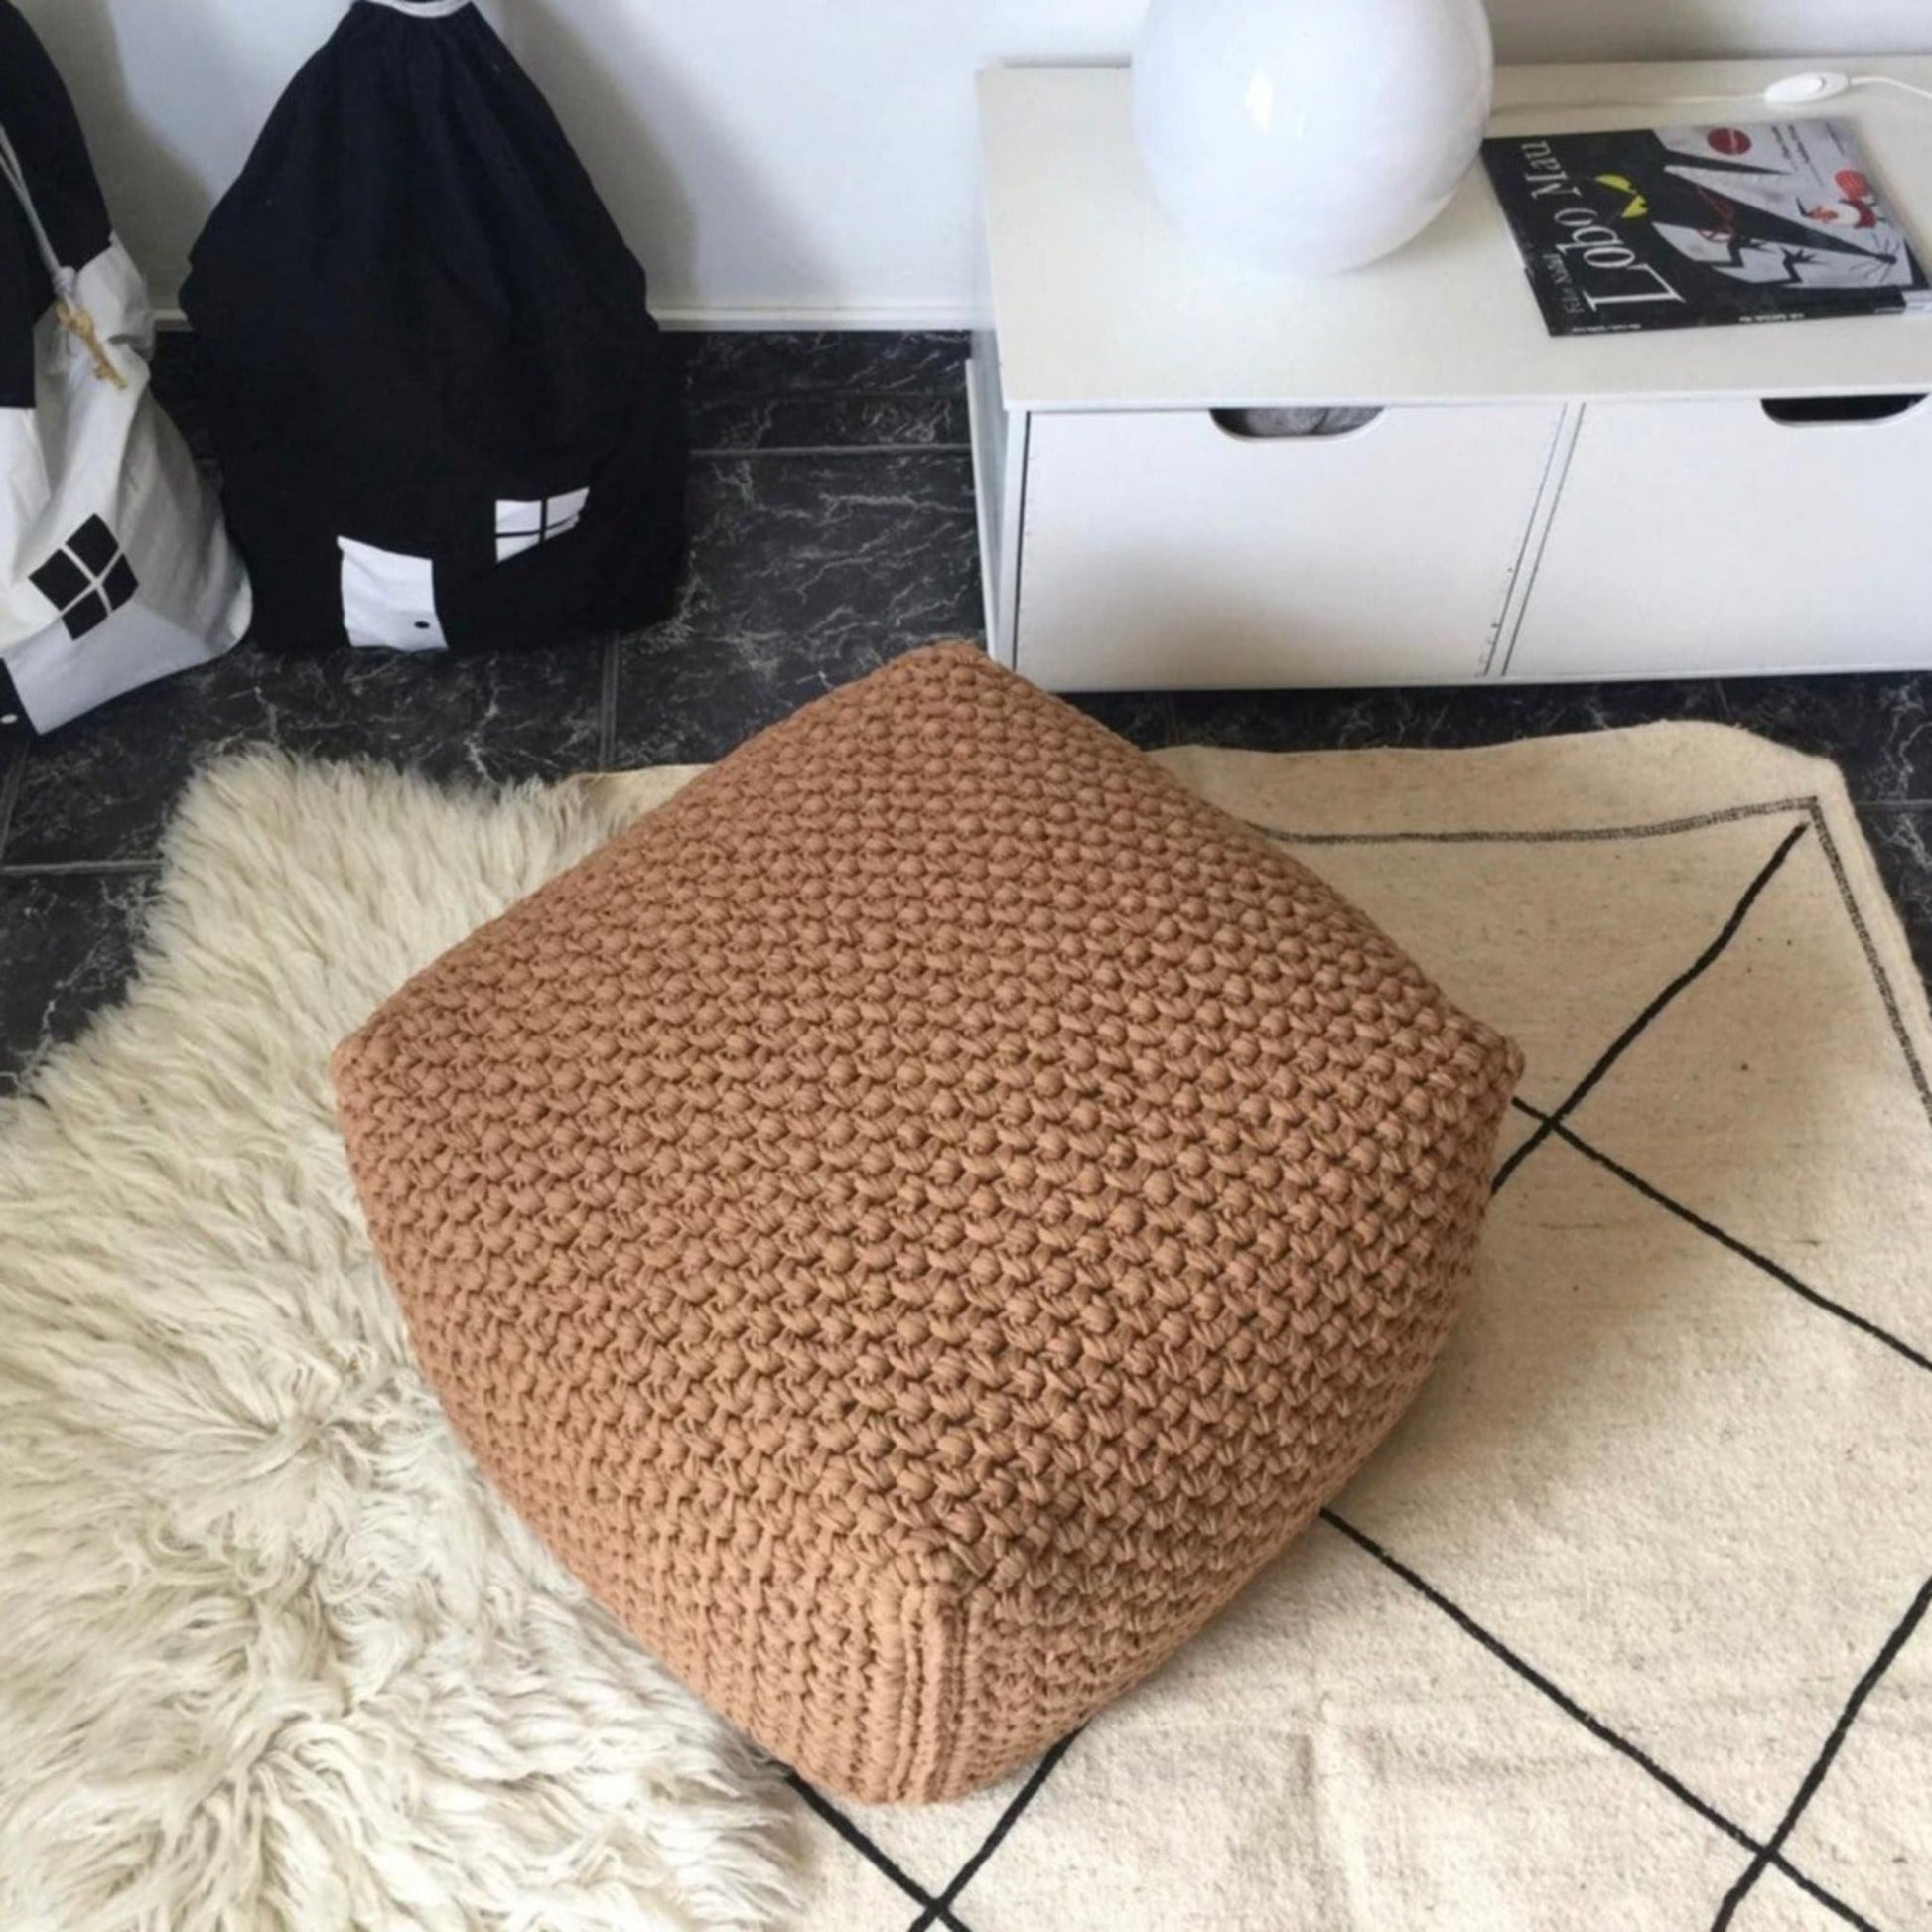 Guys I made my very own pouf furniture from recycled T-shirt yarn